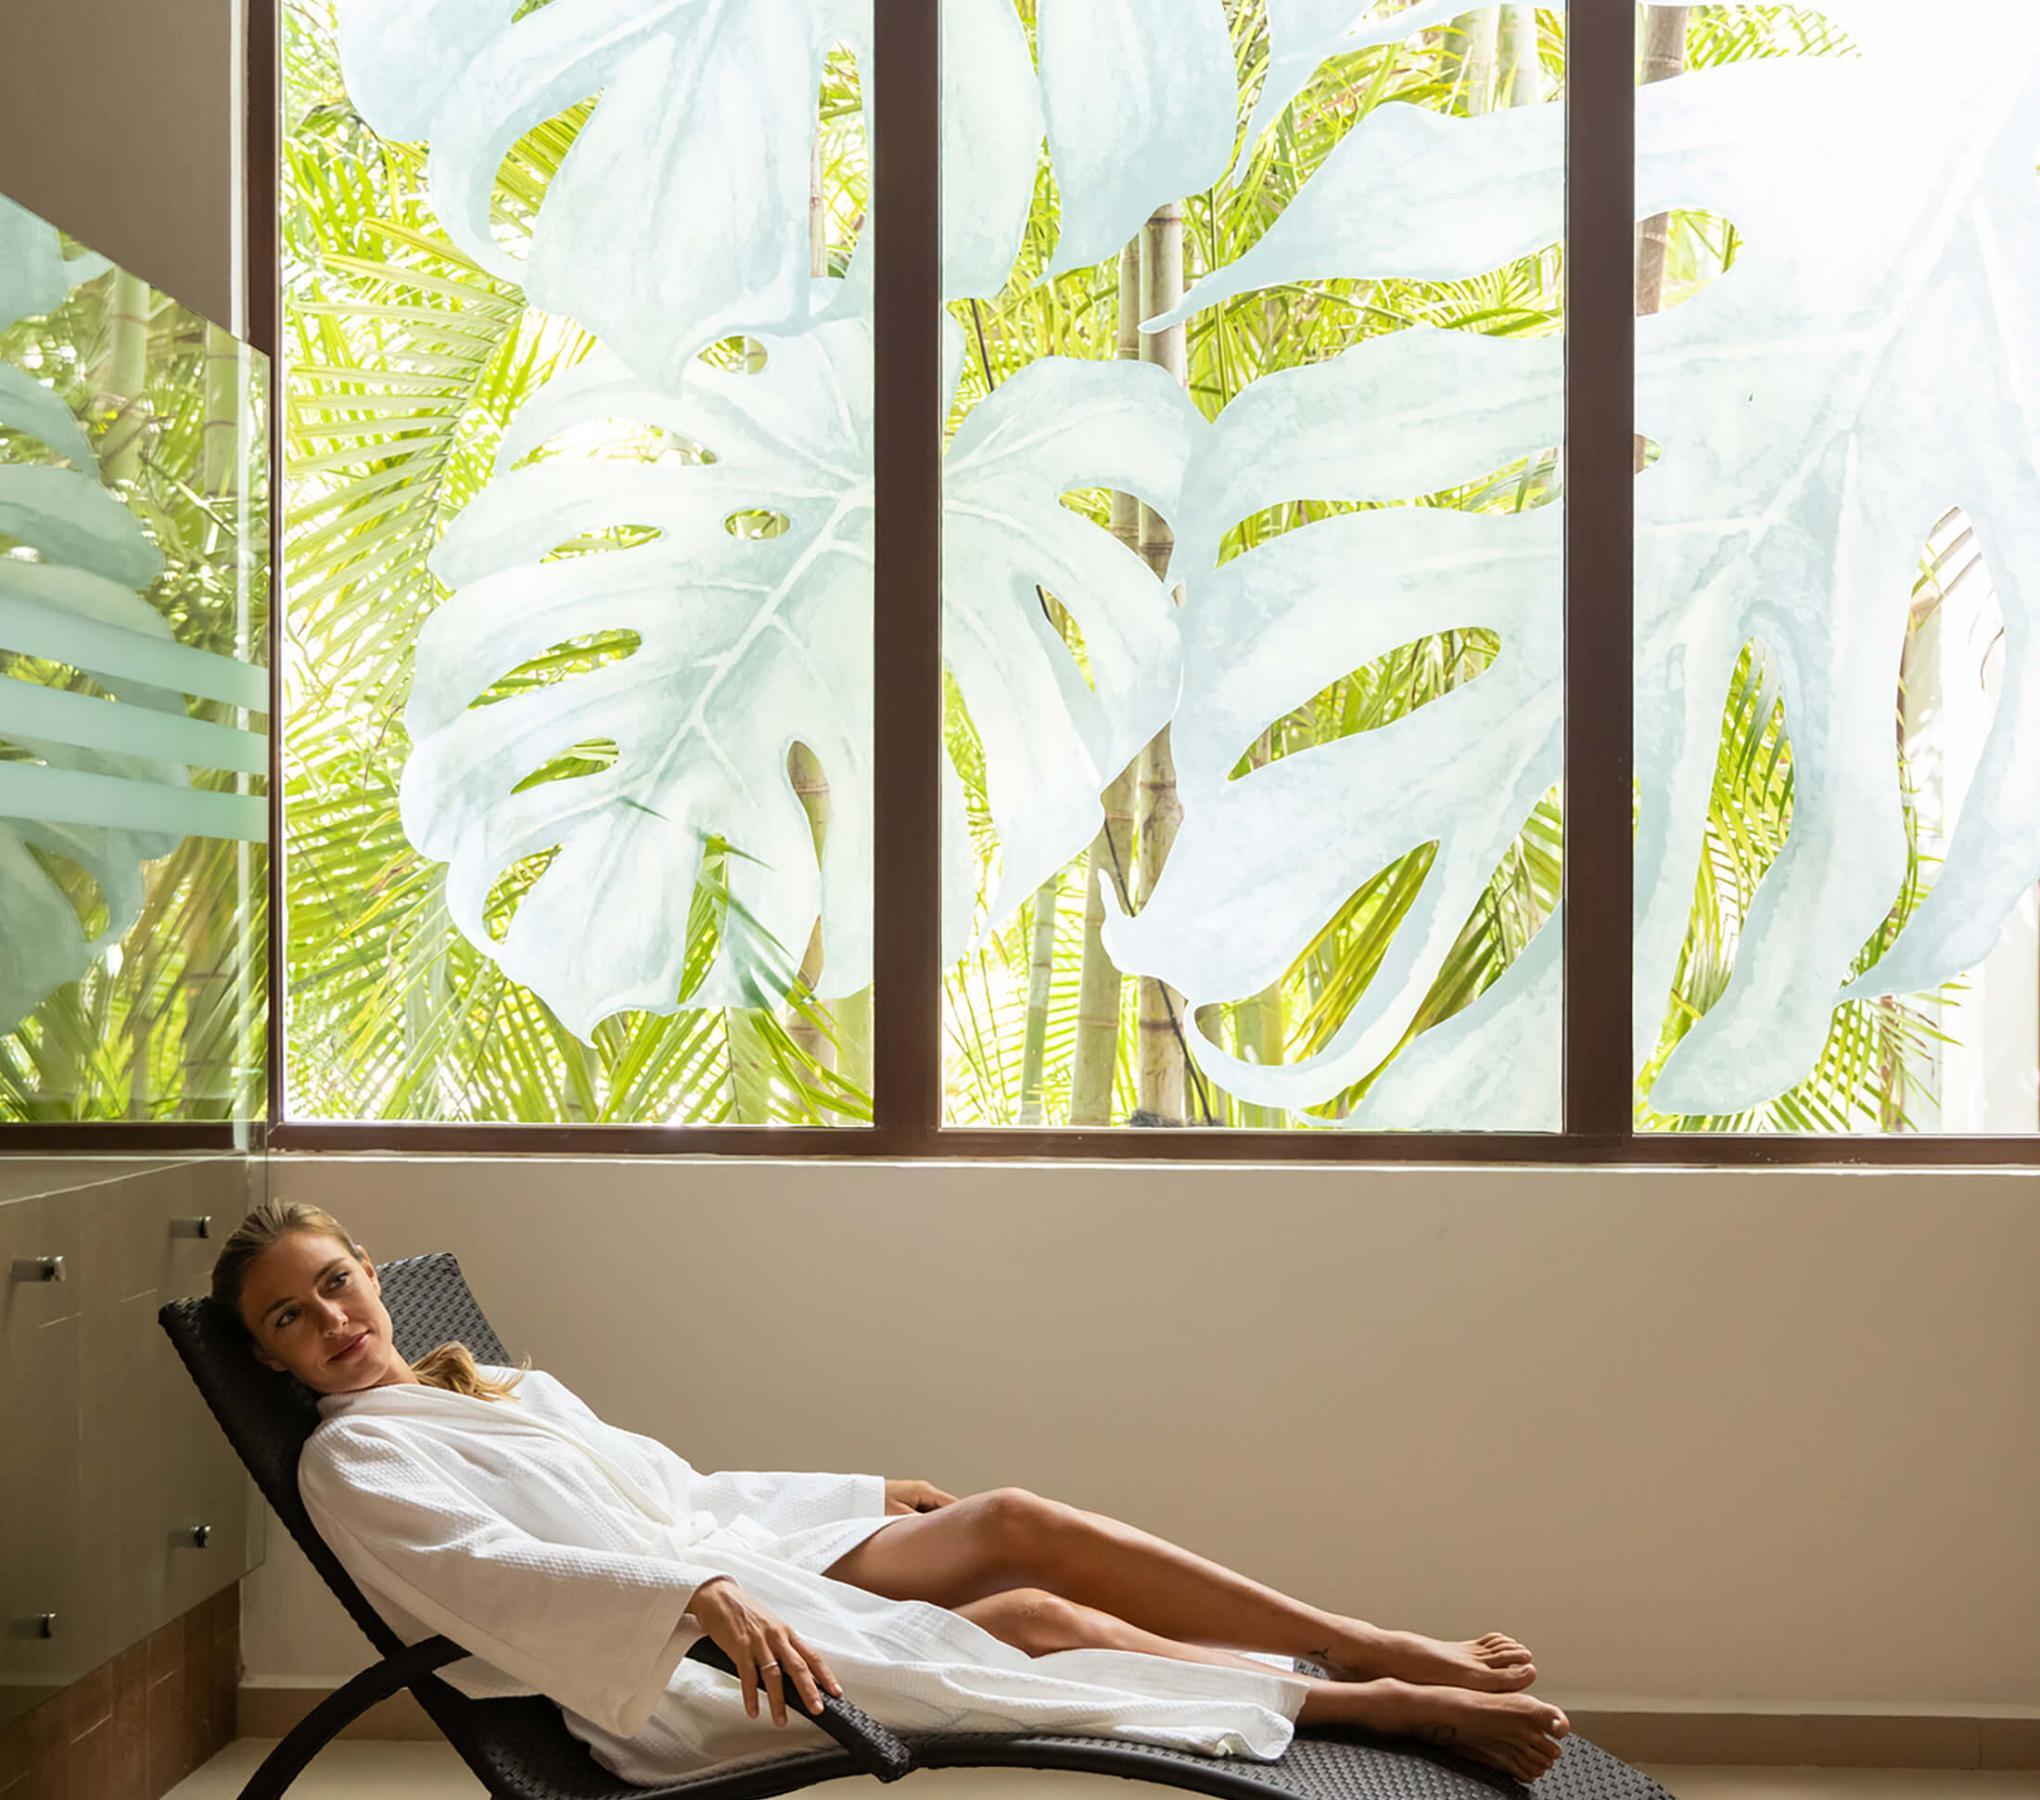 A woman relaxes at a spa